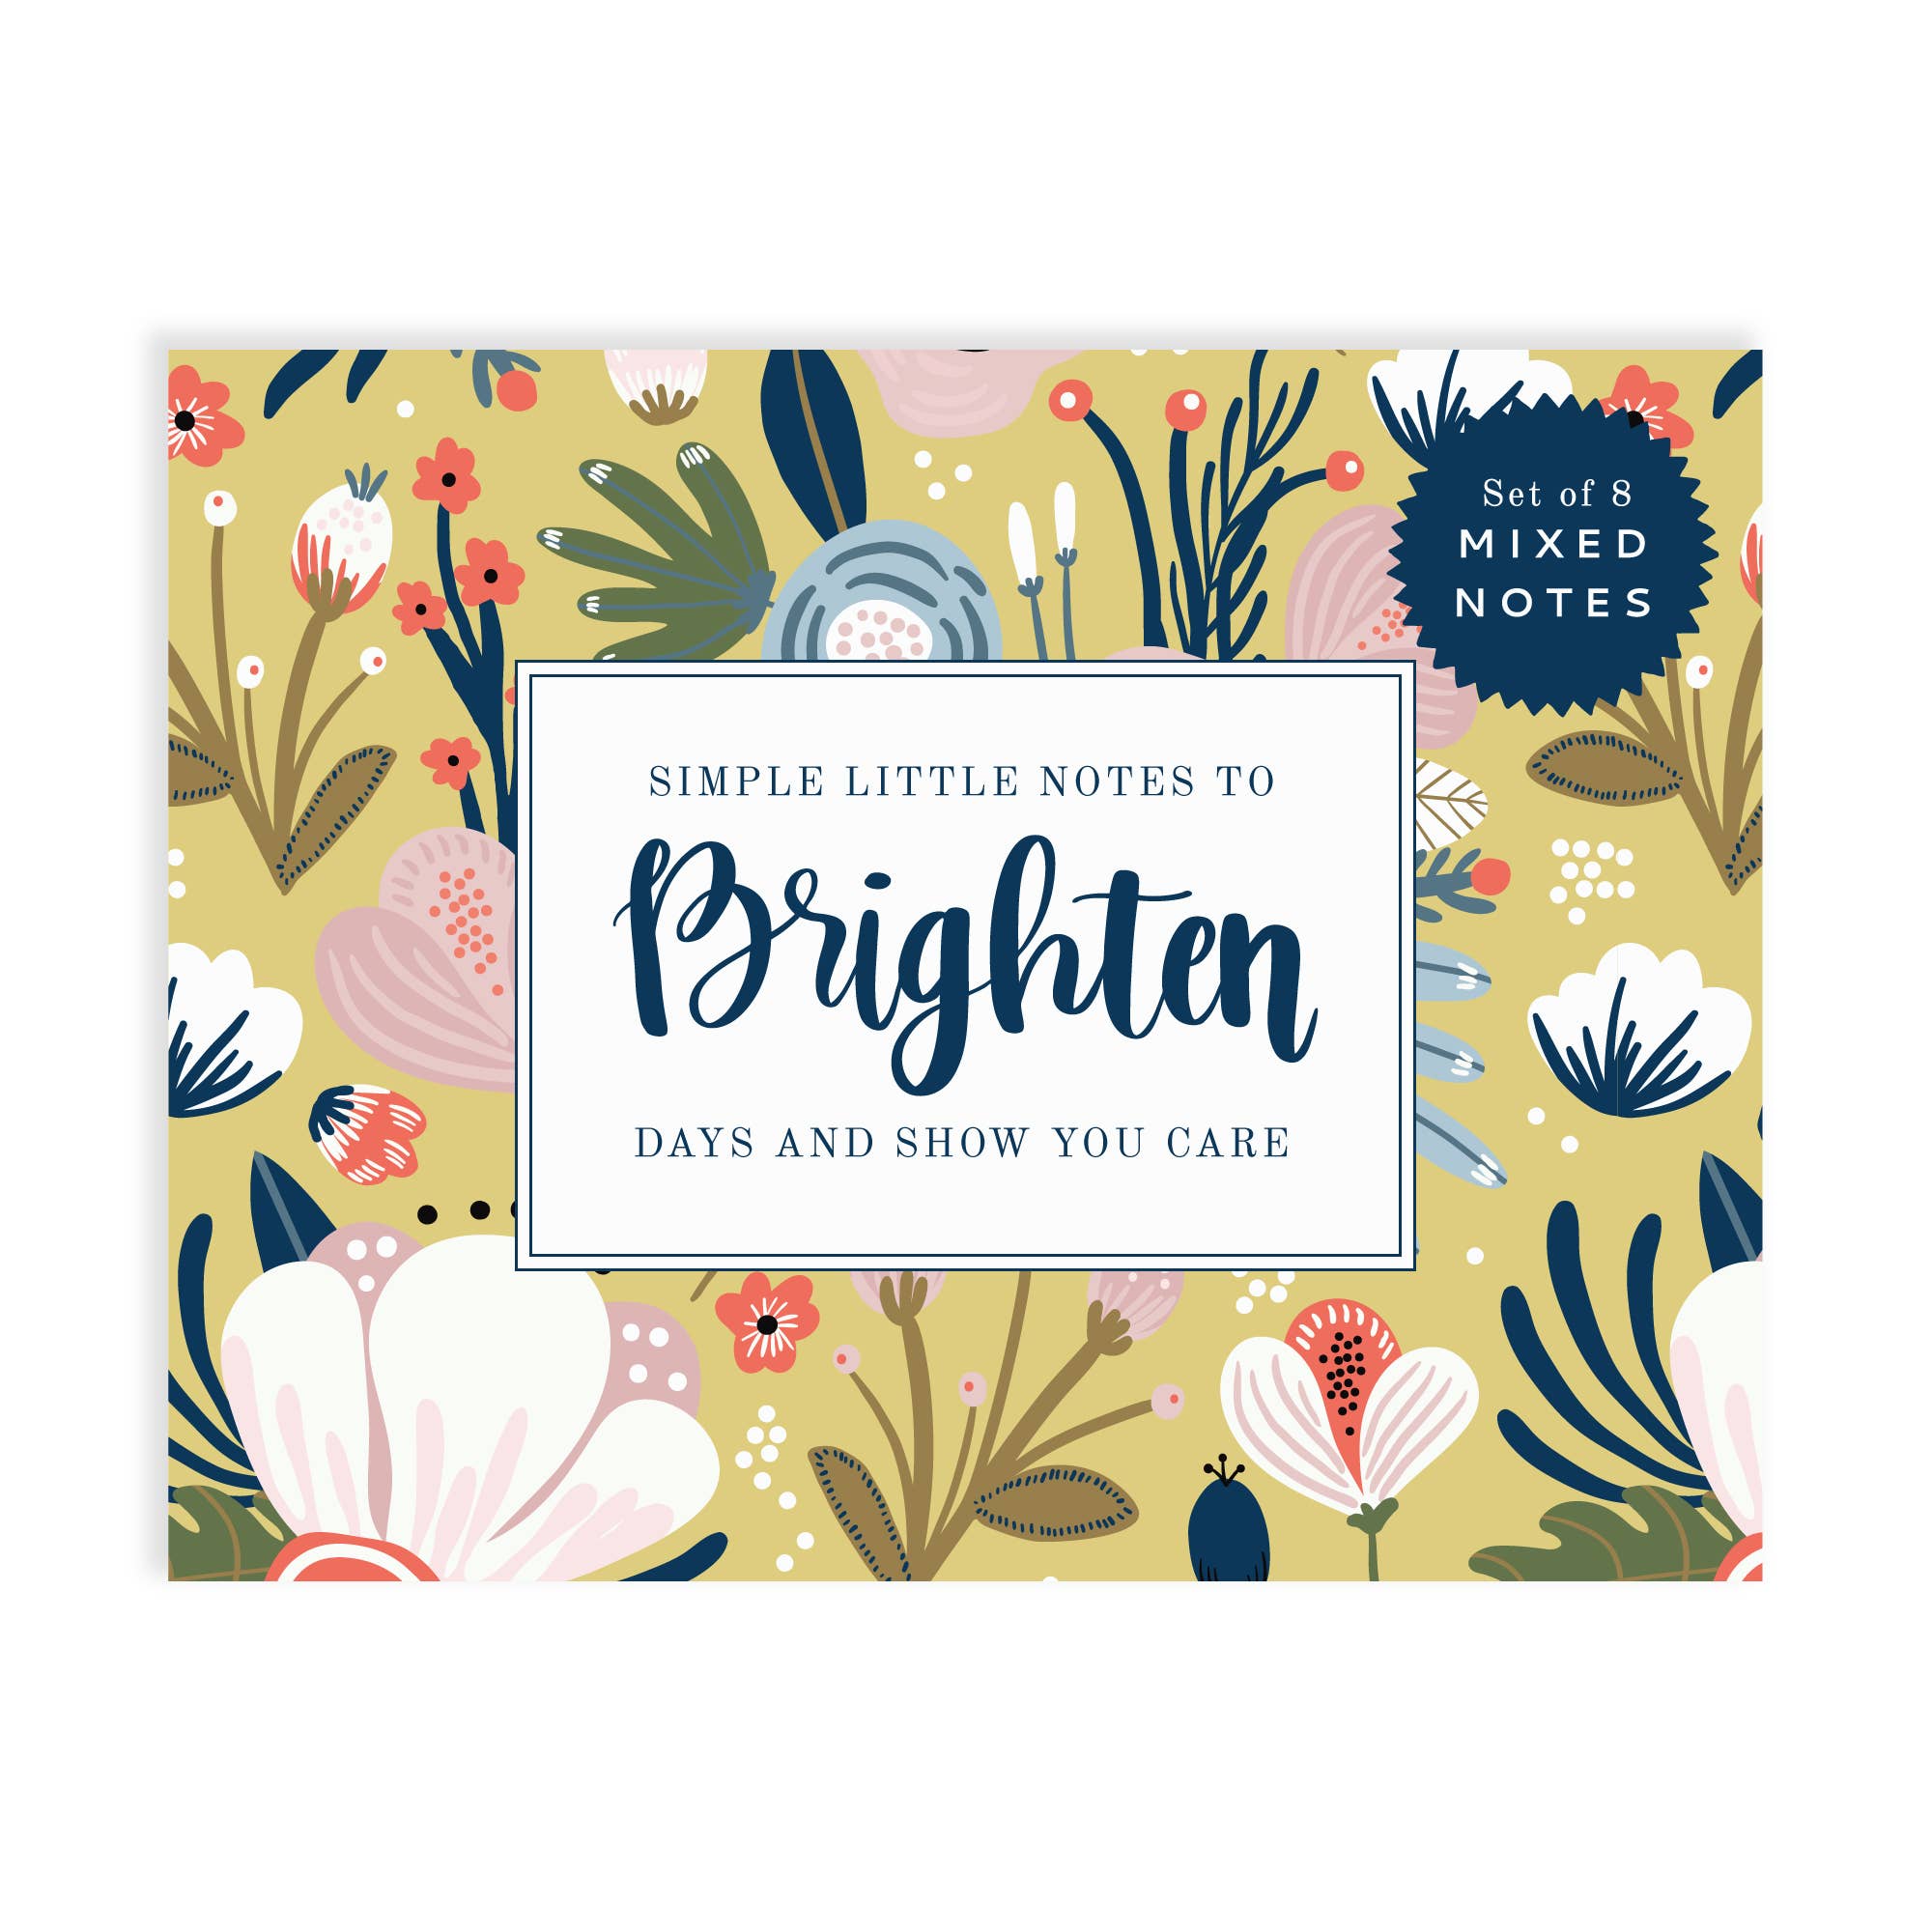 Brighten Notes Stationary Cards